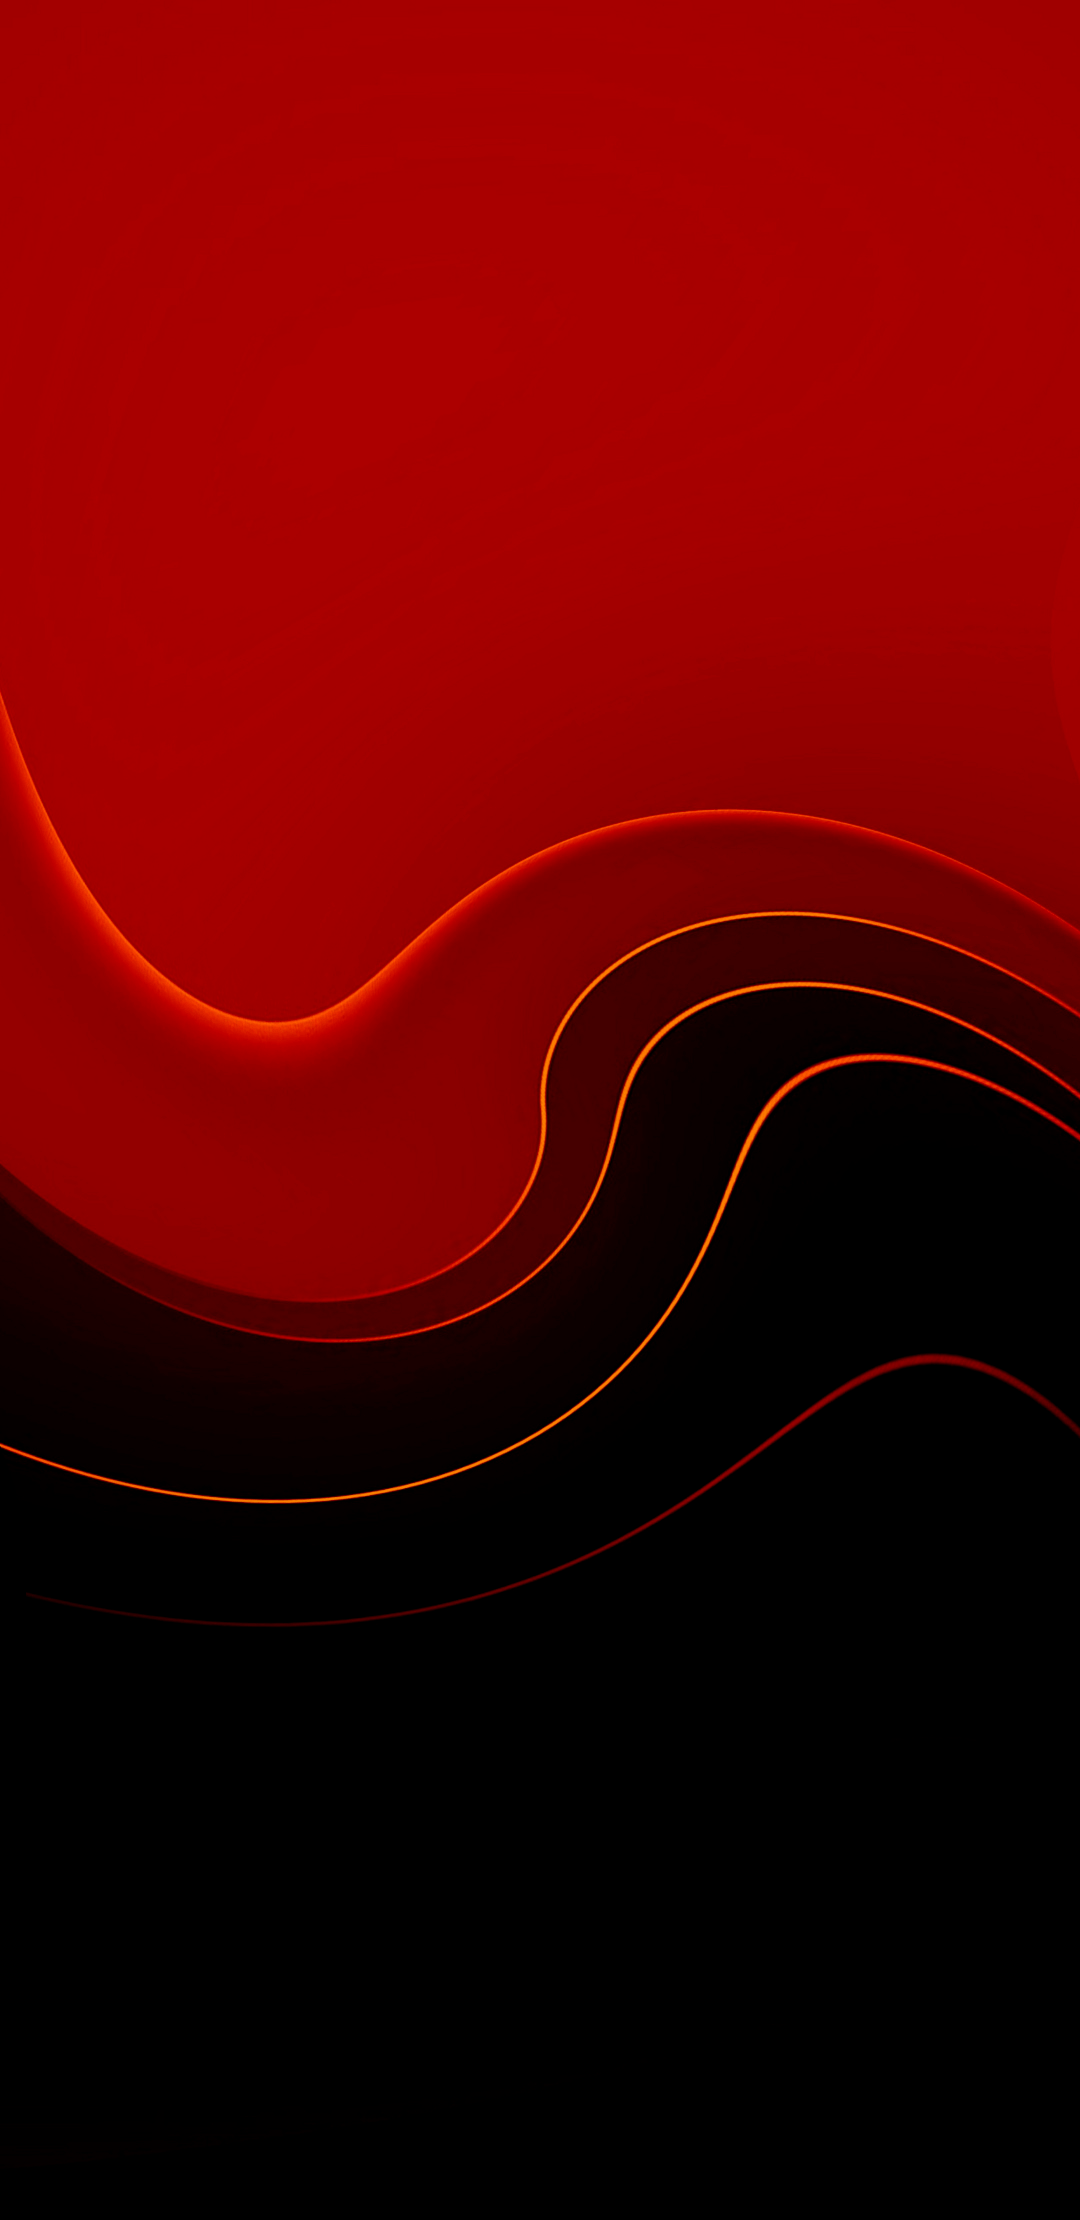 Red and Black [1080x2220]